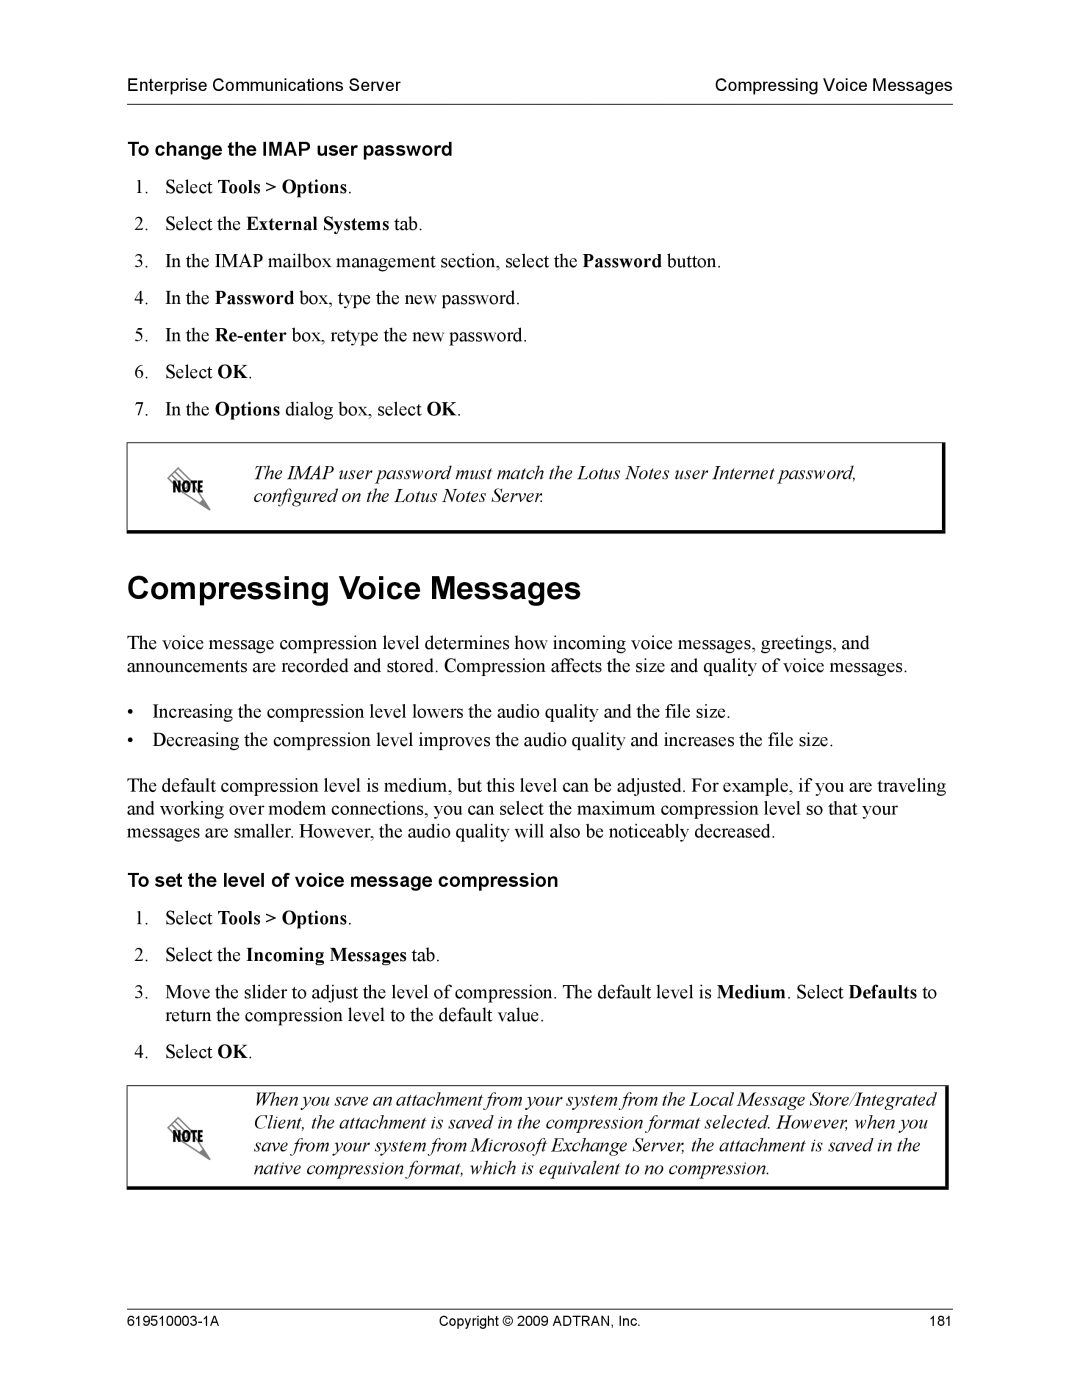 ADTRAN 619510003-1A manual Compressing Voice Messages, To change the IMAP user password 